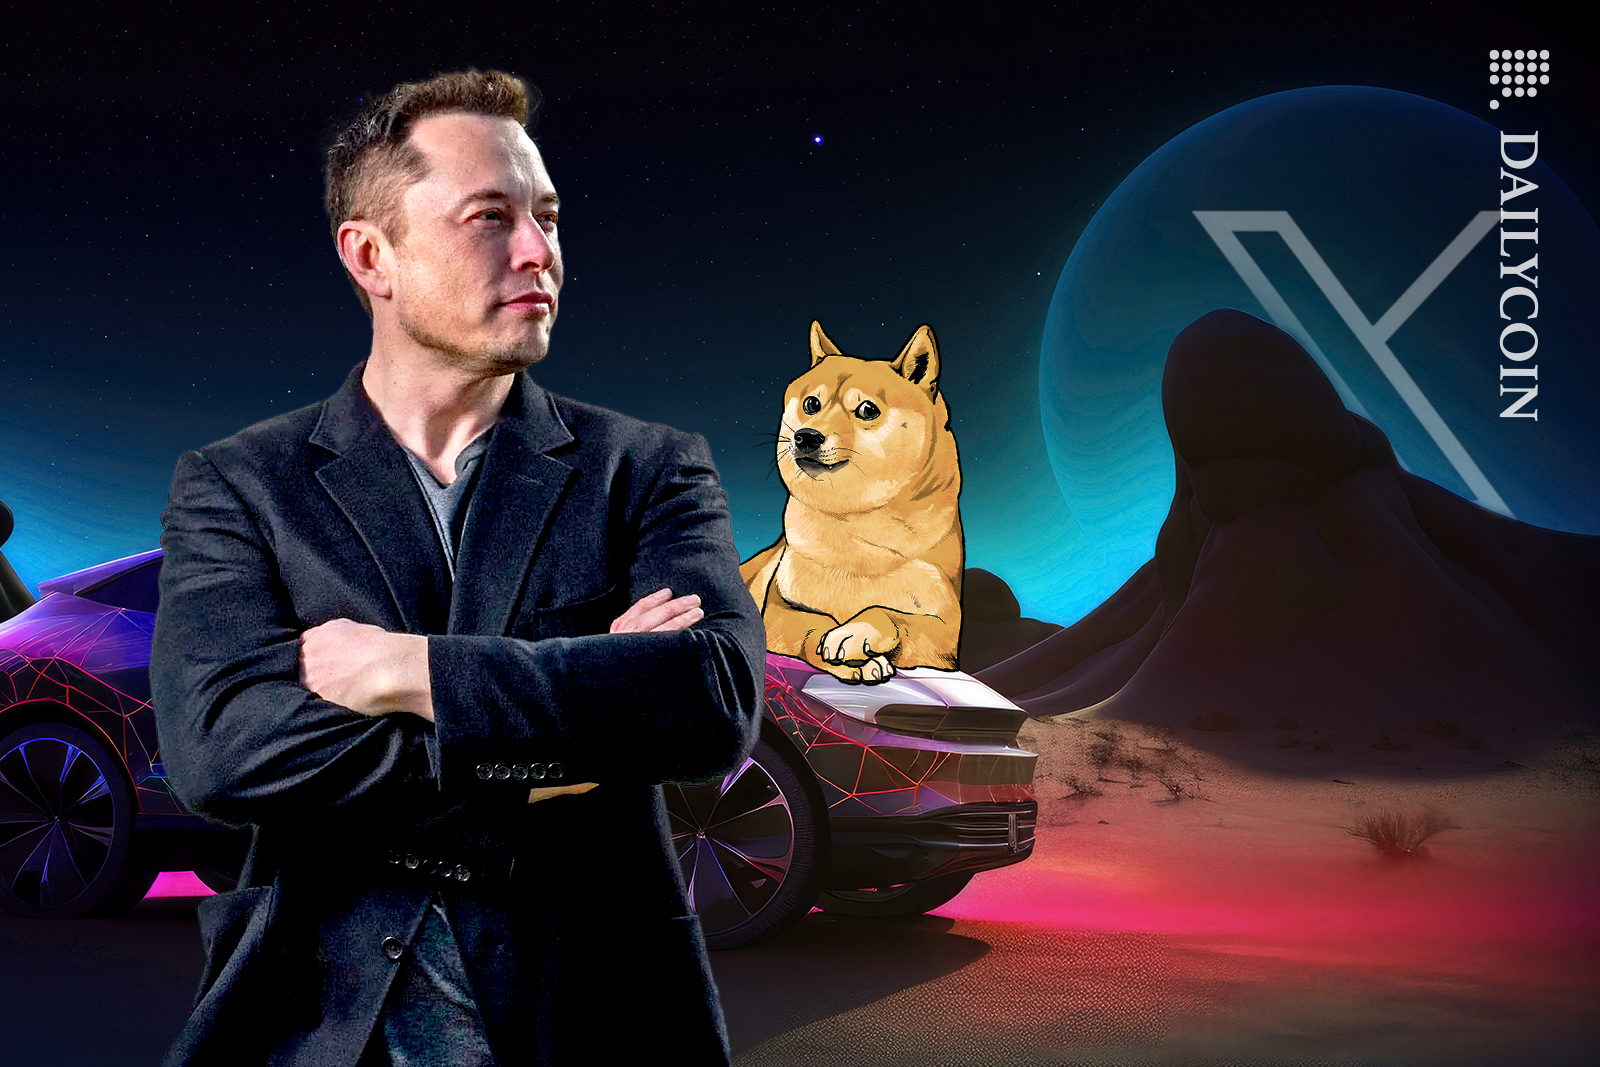 Elon Musk in Space, filled with of new Twitter moon phase, Tesla and Doge.